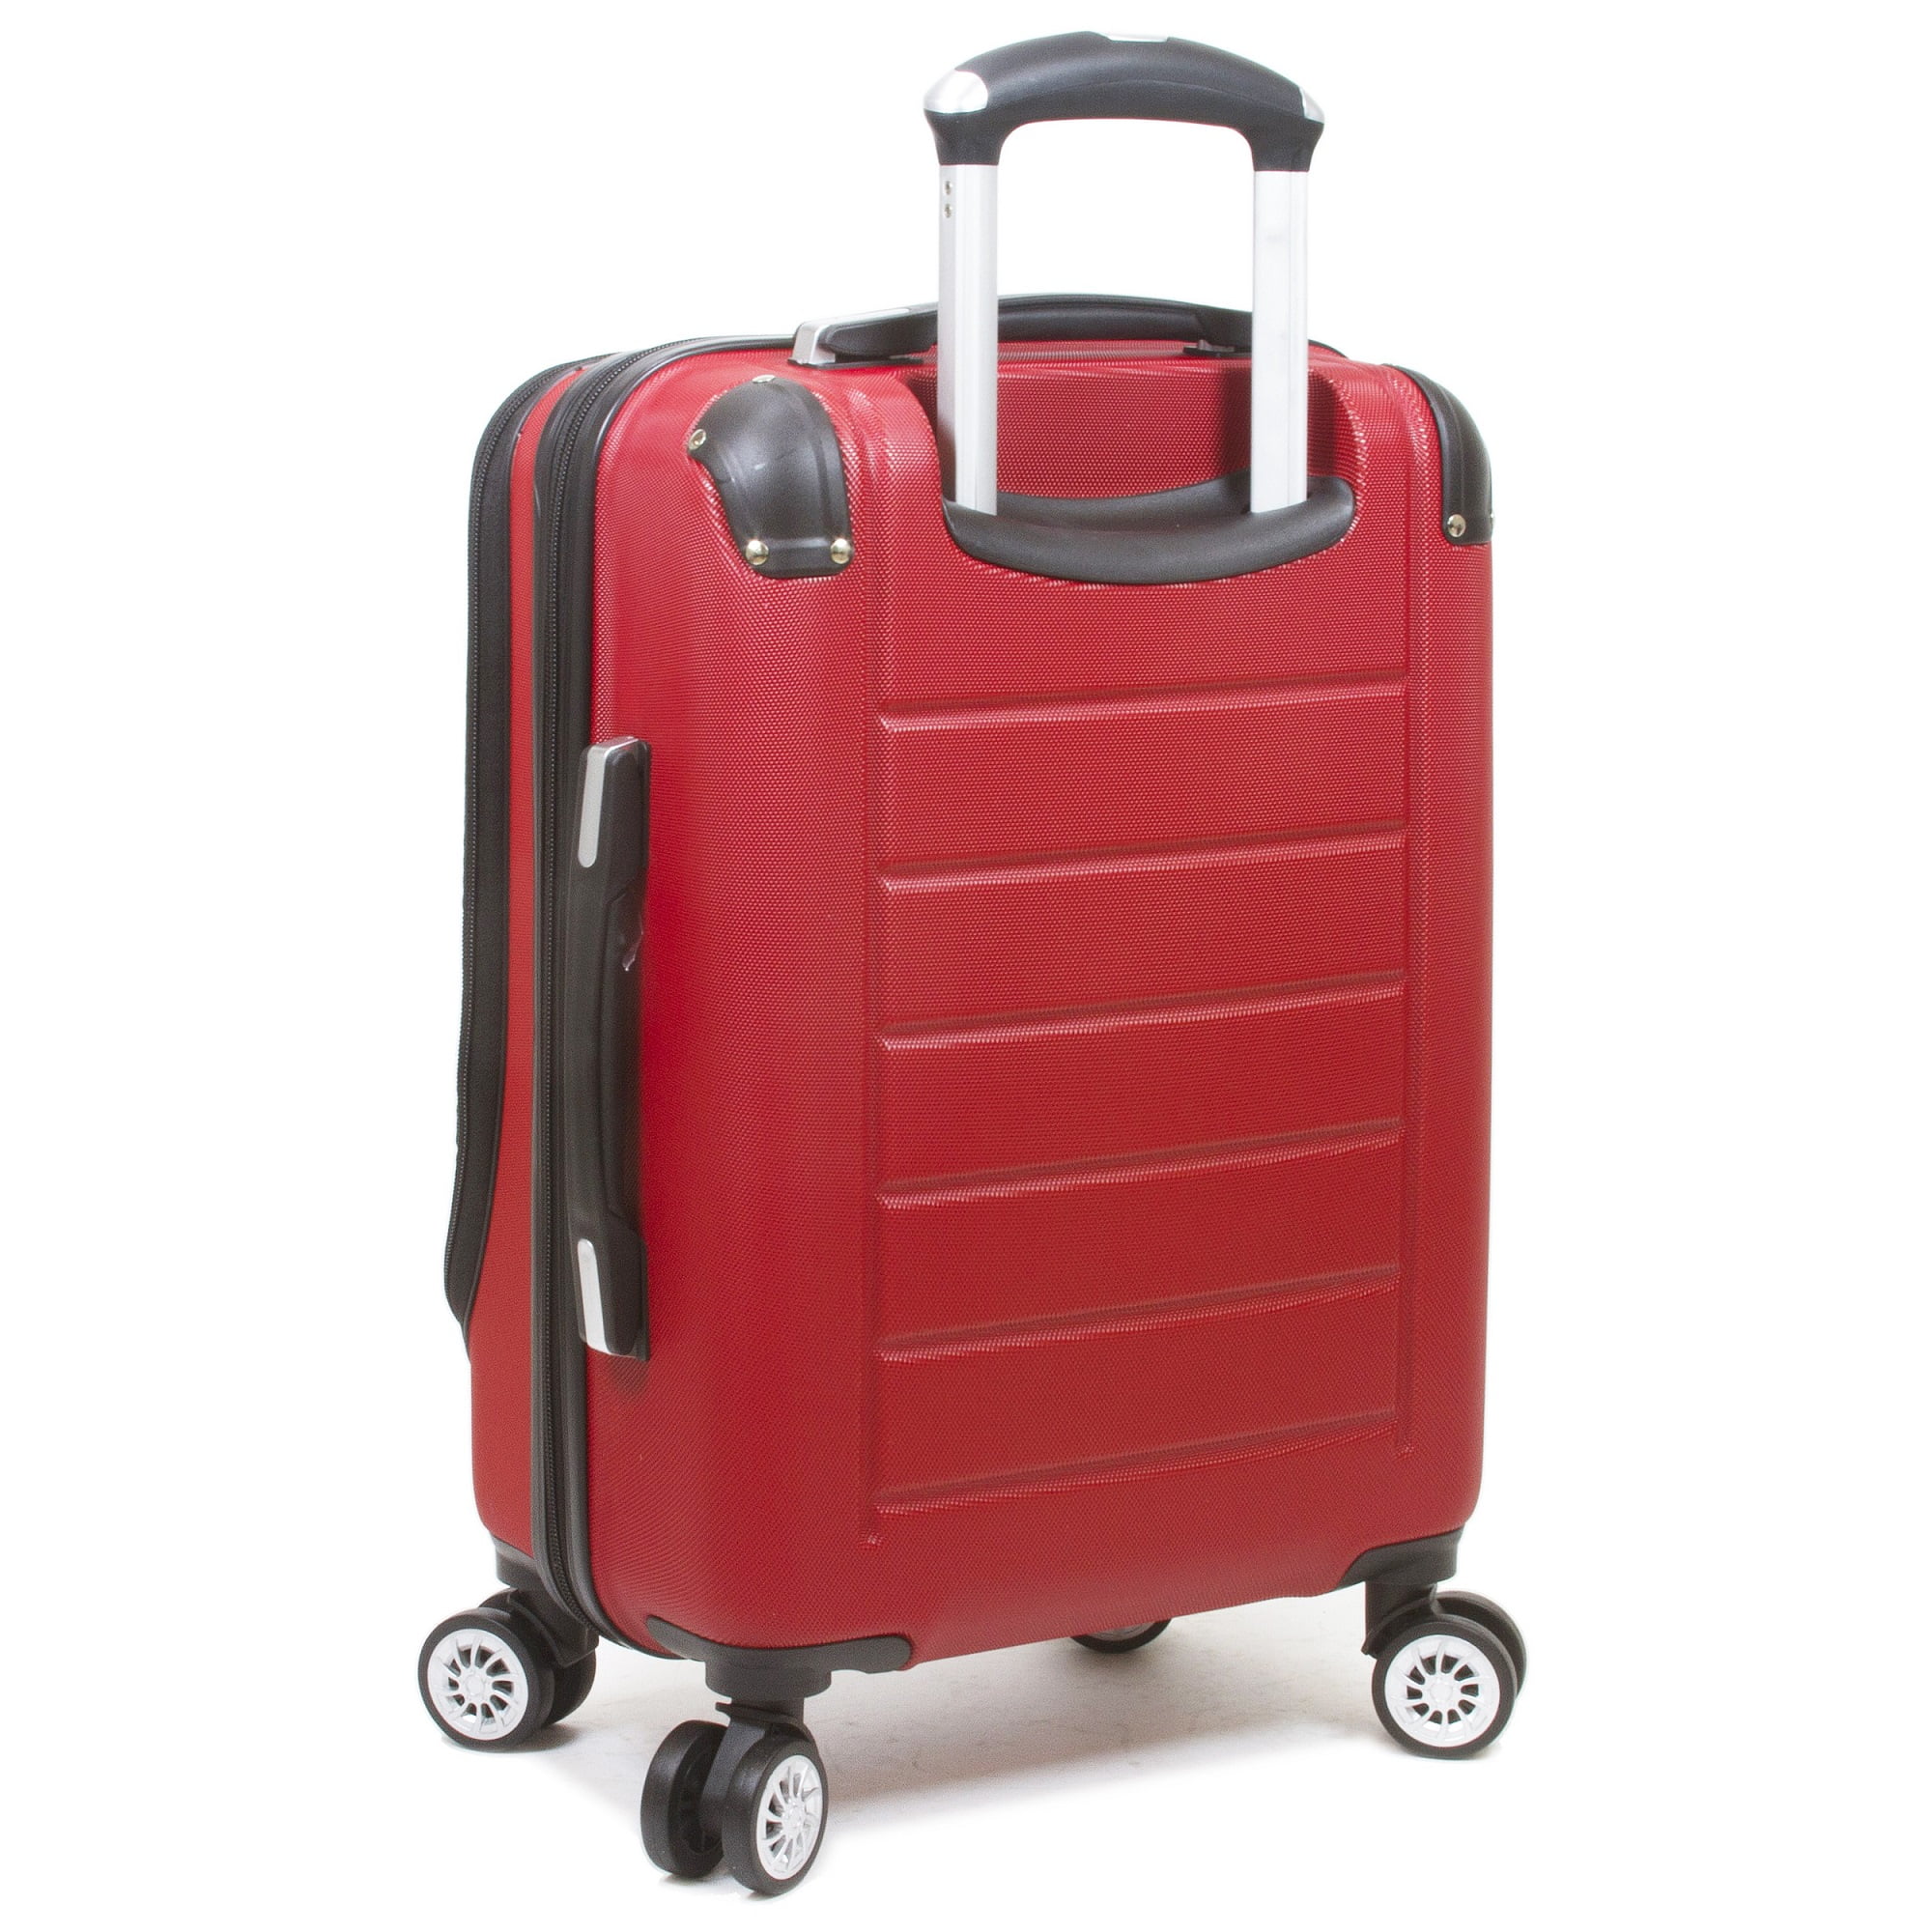 Dejuno Compact Hardside 20-inch Carry-on Luggage with Laptop Pocket - Red